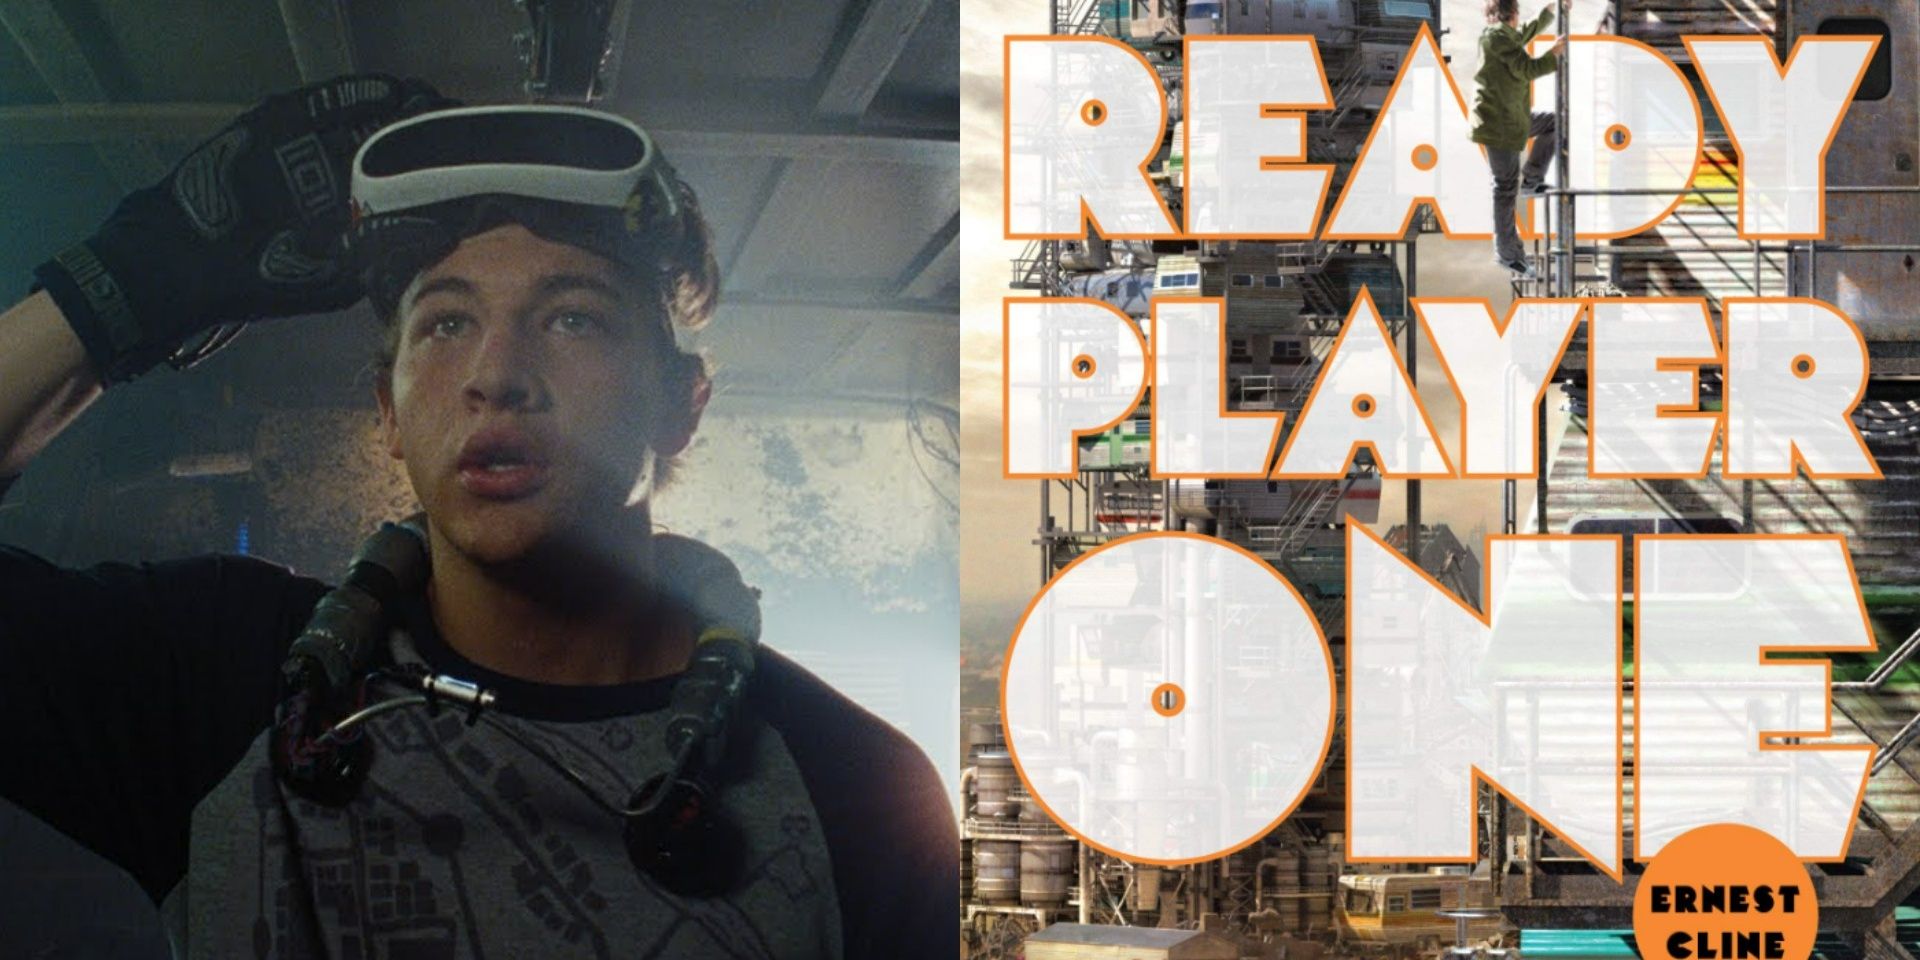 (Left) A boy taking off his VR gear / (Right) Ready Player One book cover with trailers stacked in the background